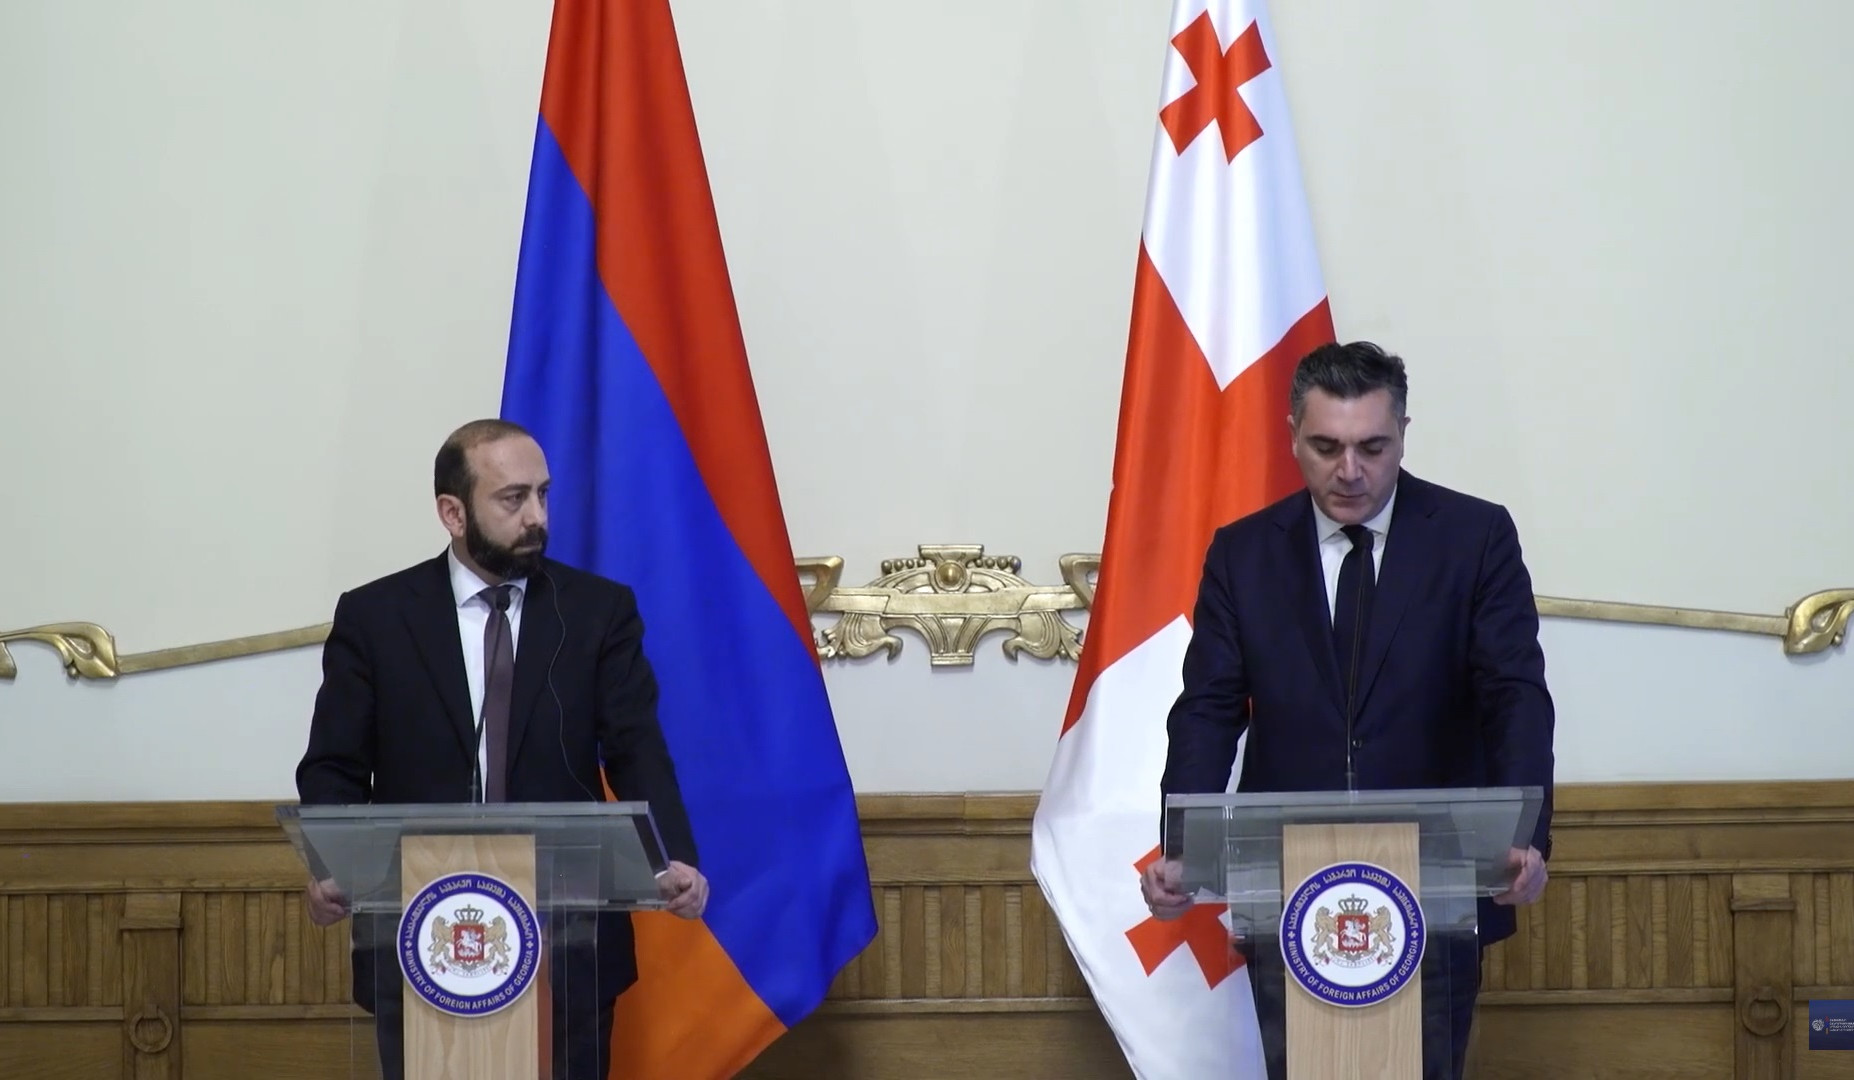 With signing of strategic partnership declaration, our bilateral cooperation has reached qualitatively new level: Darchiashvili to Mirzoyan